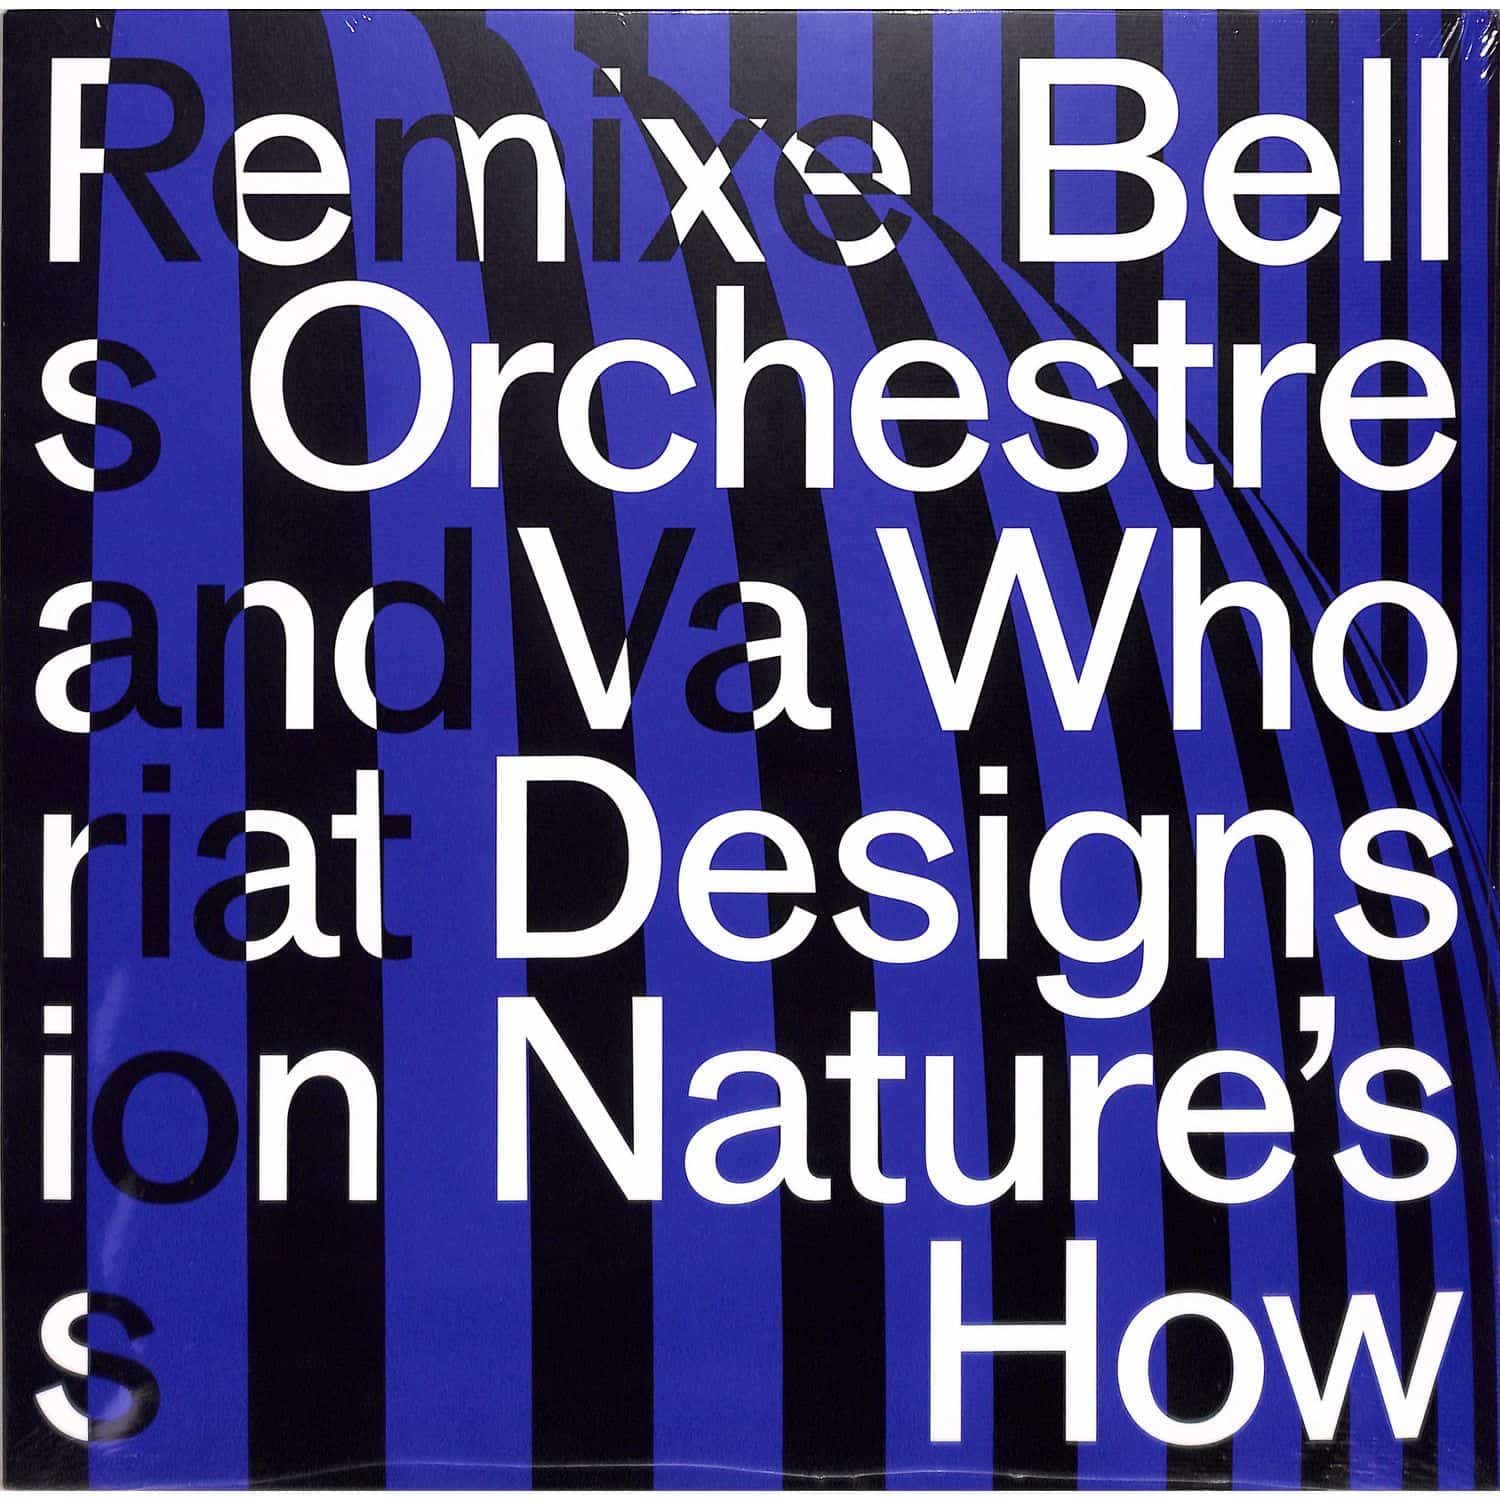 Bell Orchestre - WHO DESIGNS NATURES HOW 